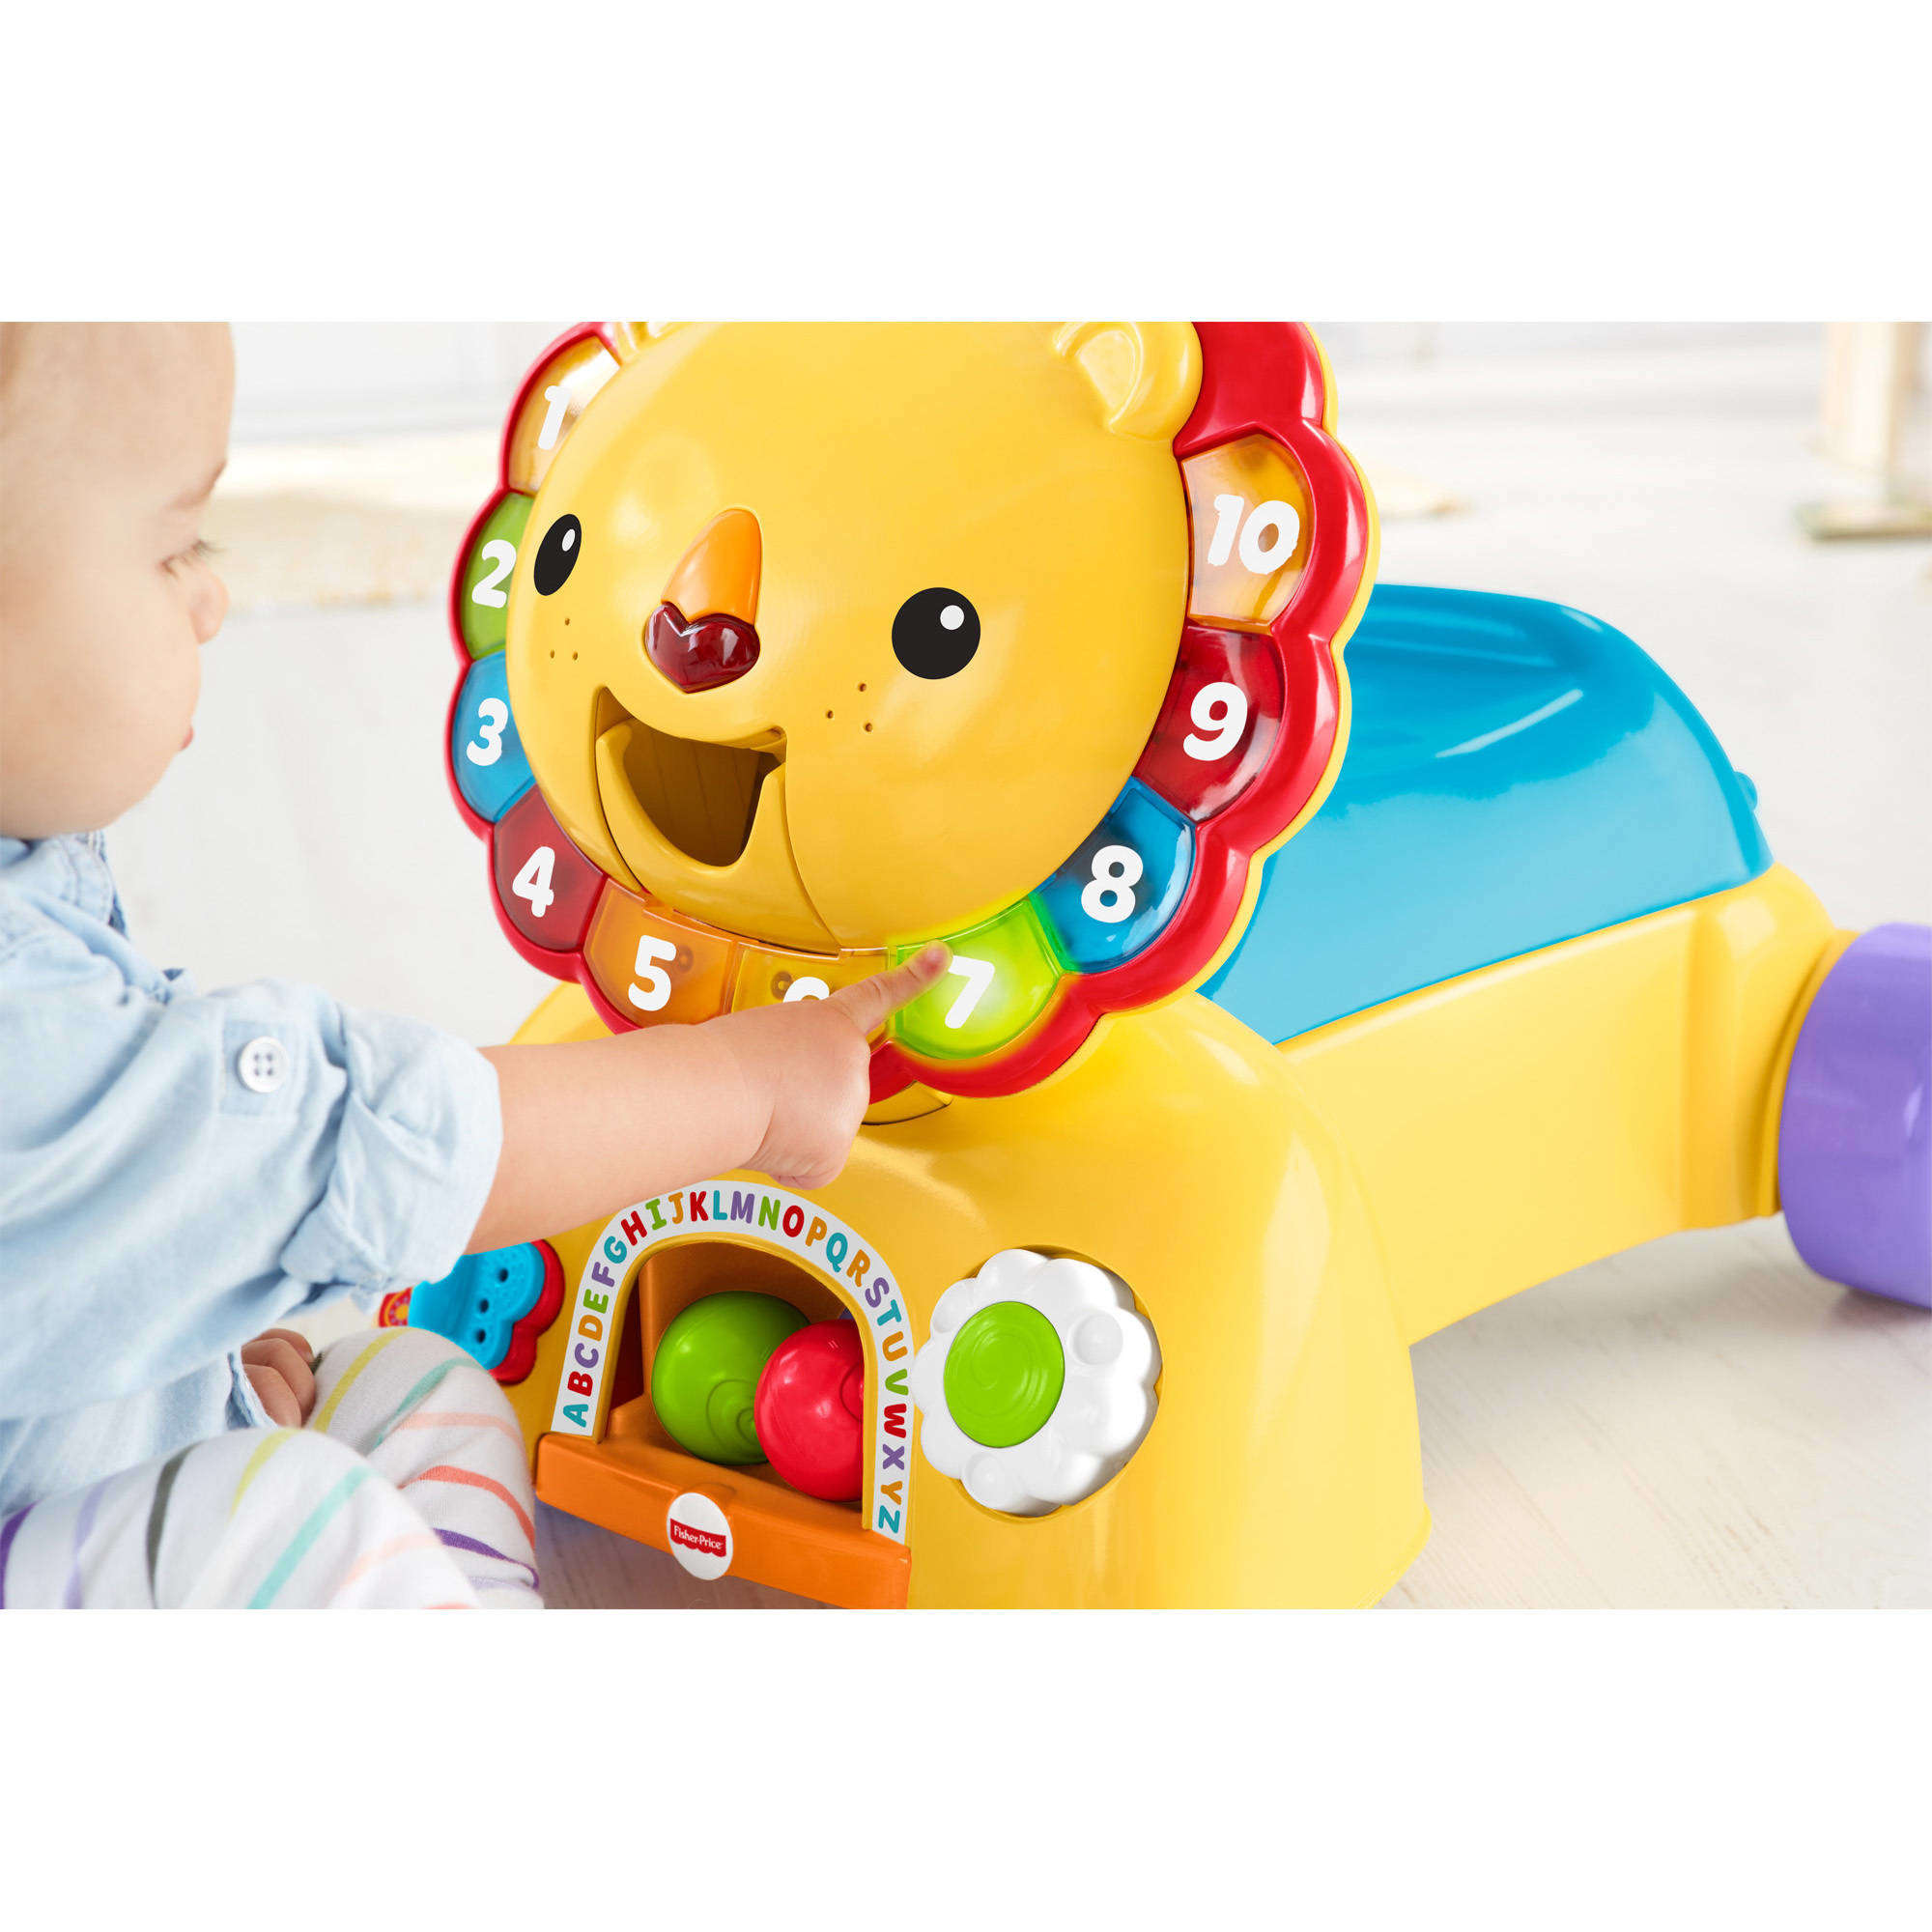 Fisher-Price 3-in-1 Sit, Stride & Ride Interactive Lion - image 5 of 11